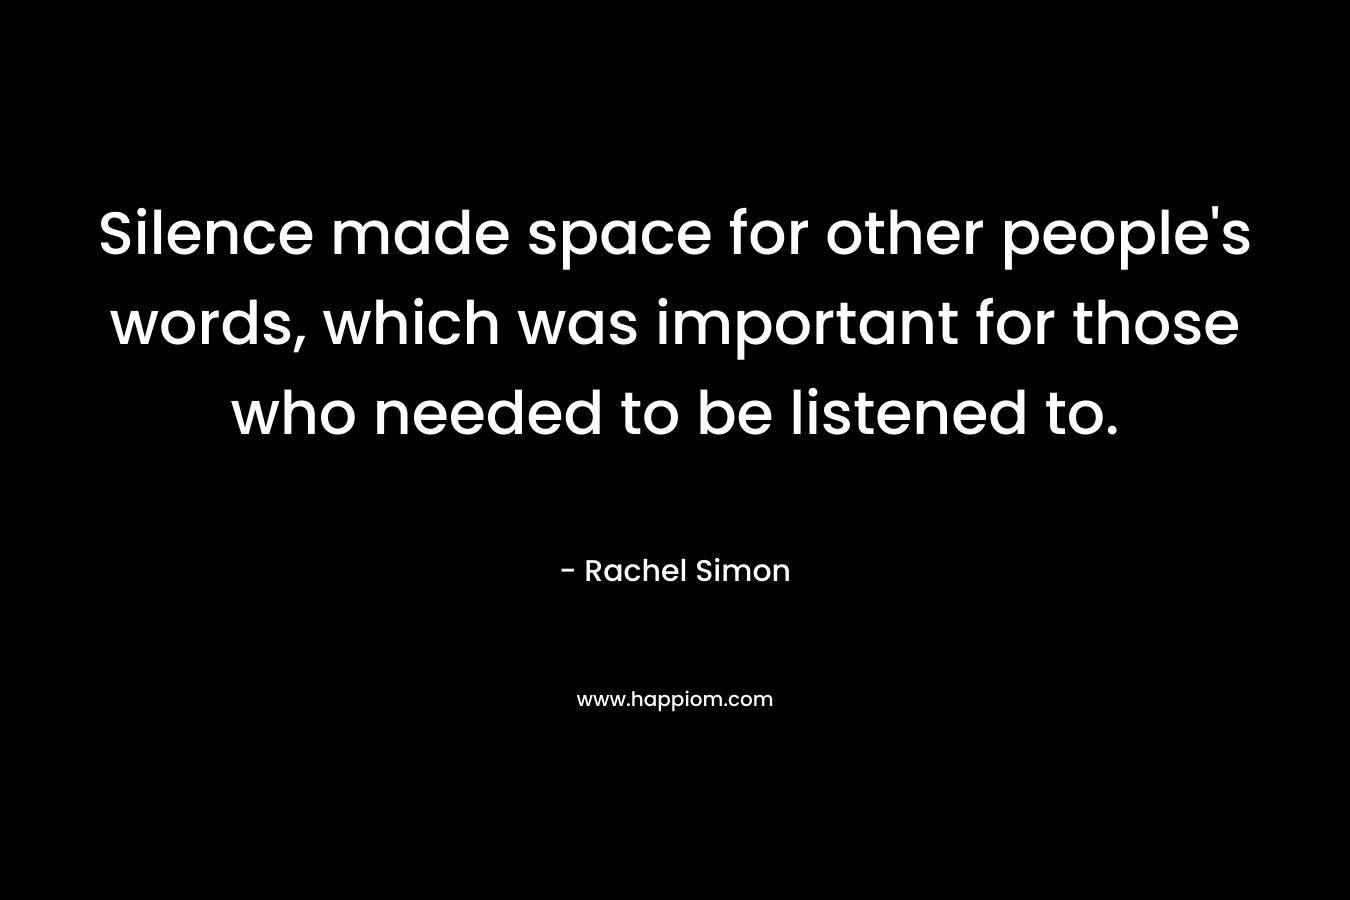 Silence made space for other people's words, which was important for those who needed to be listened to.